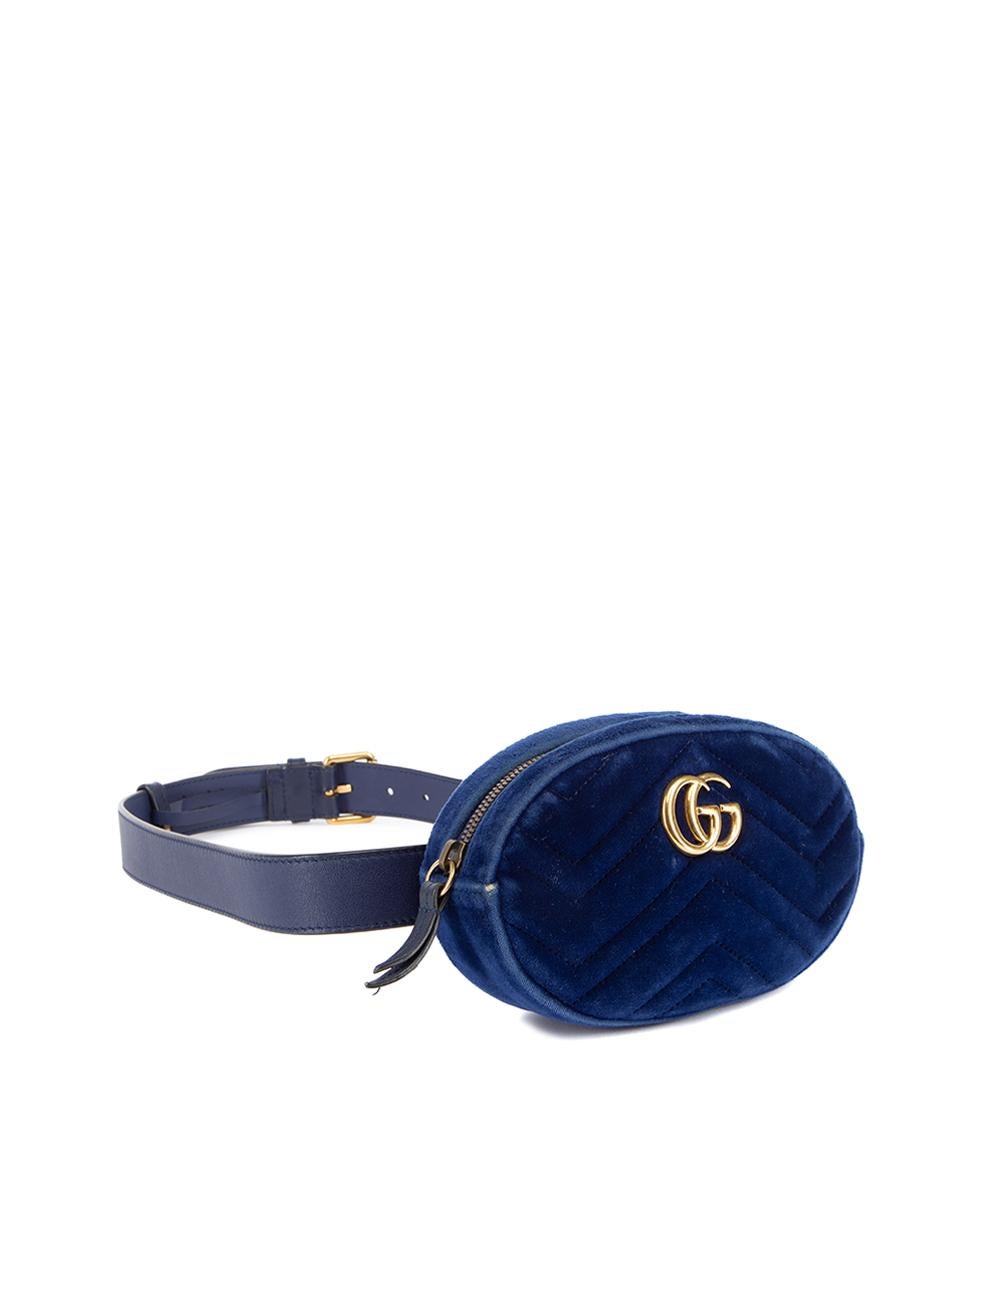 CONDITION is Good. Minor wear to bag is evident. Light wear to the velvet exterior which is worn down around the edges. Pen marks can also be seen to the bag interior on this used Gucci designer resale item. Details Blue Velvet Medium belt bag